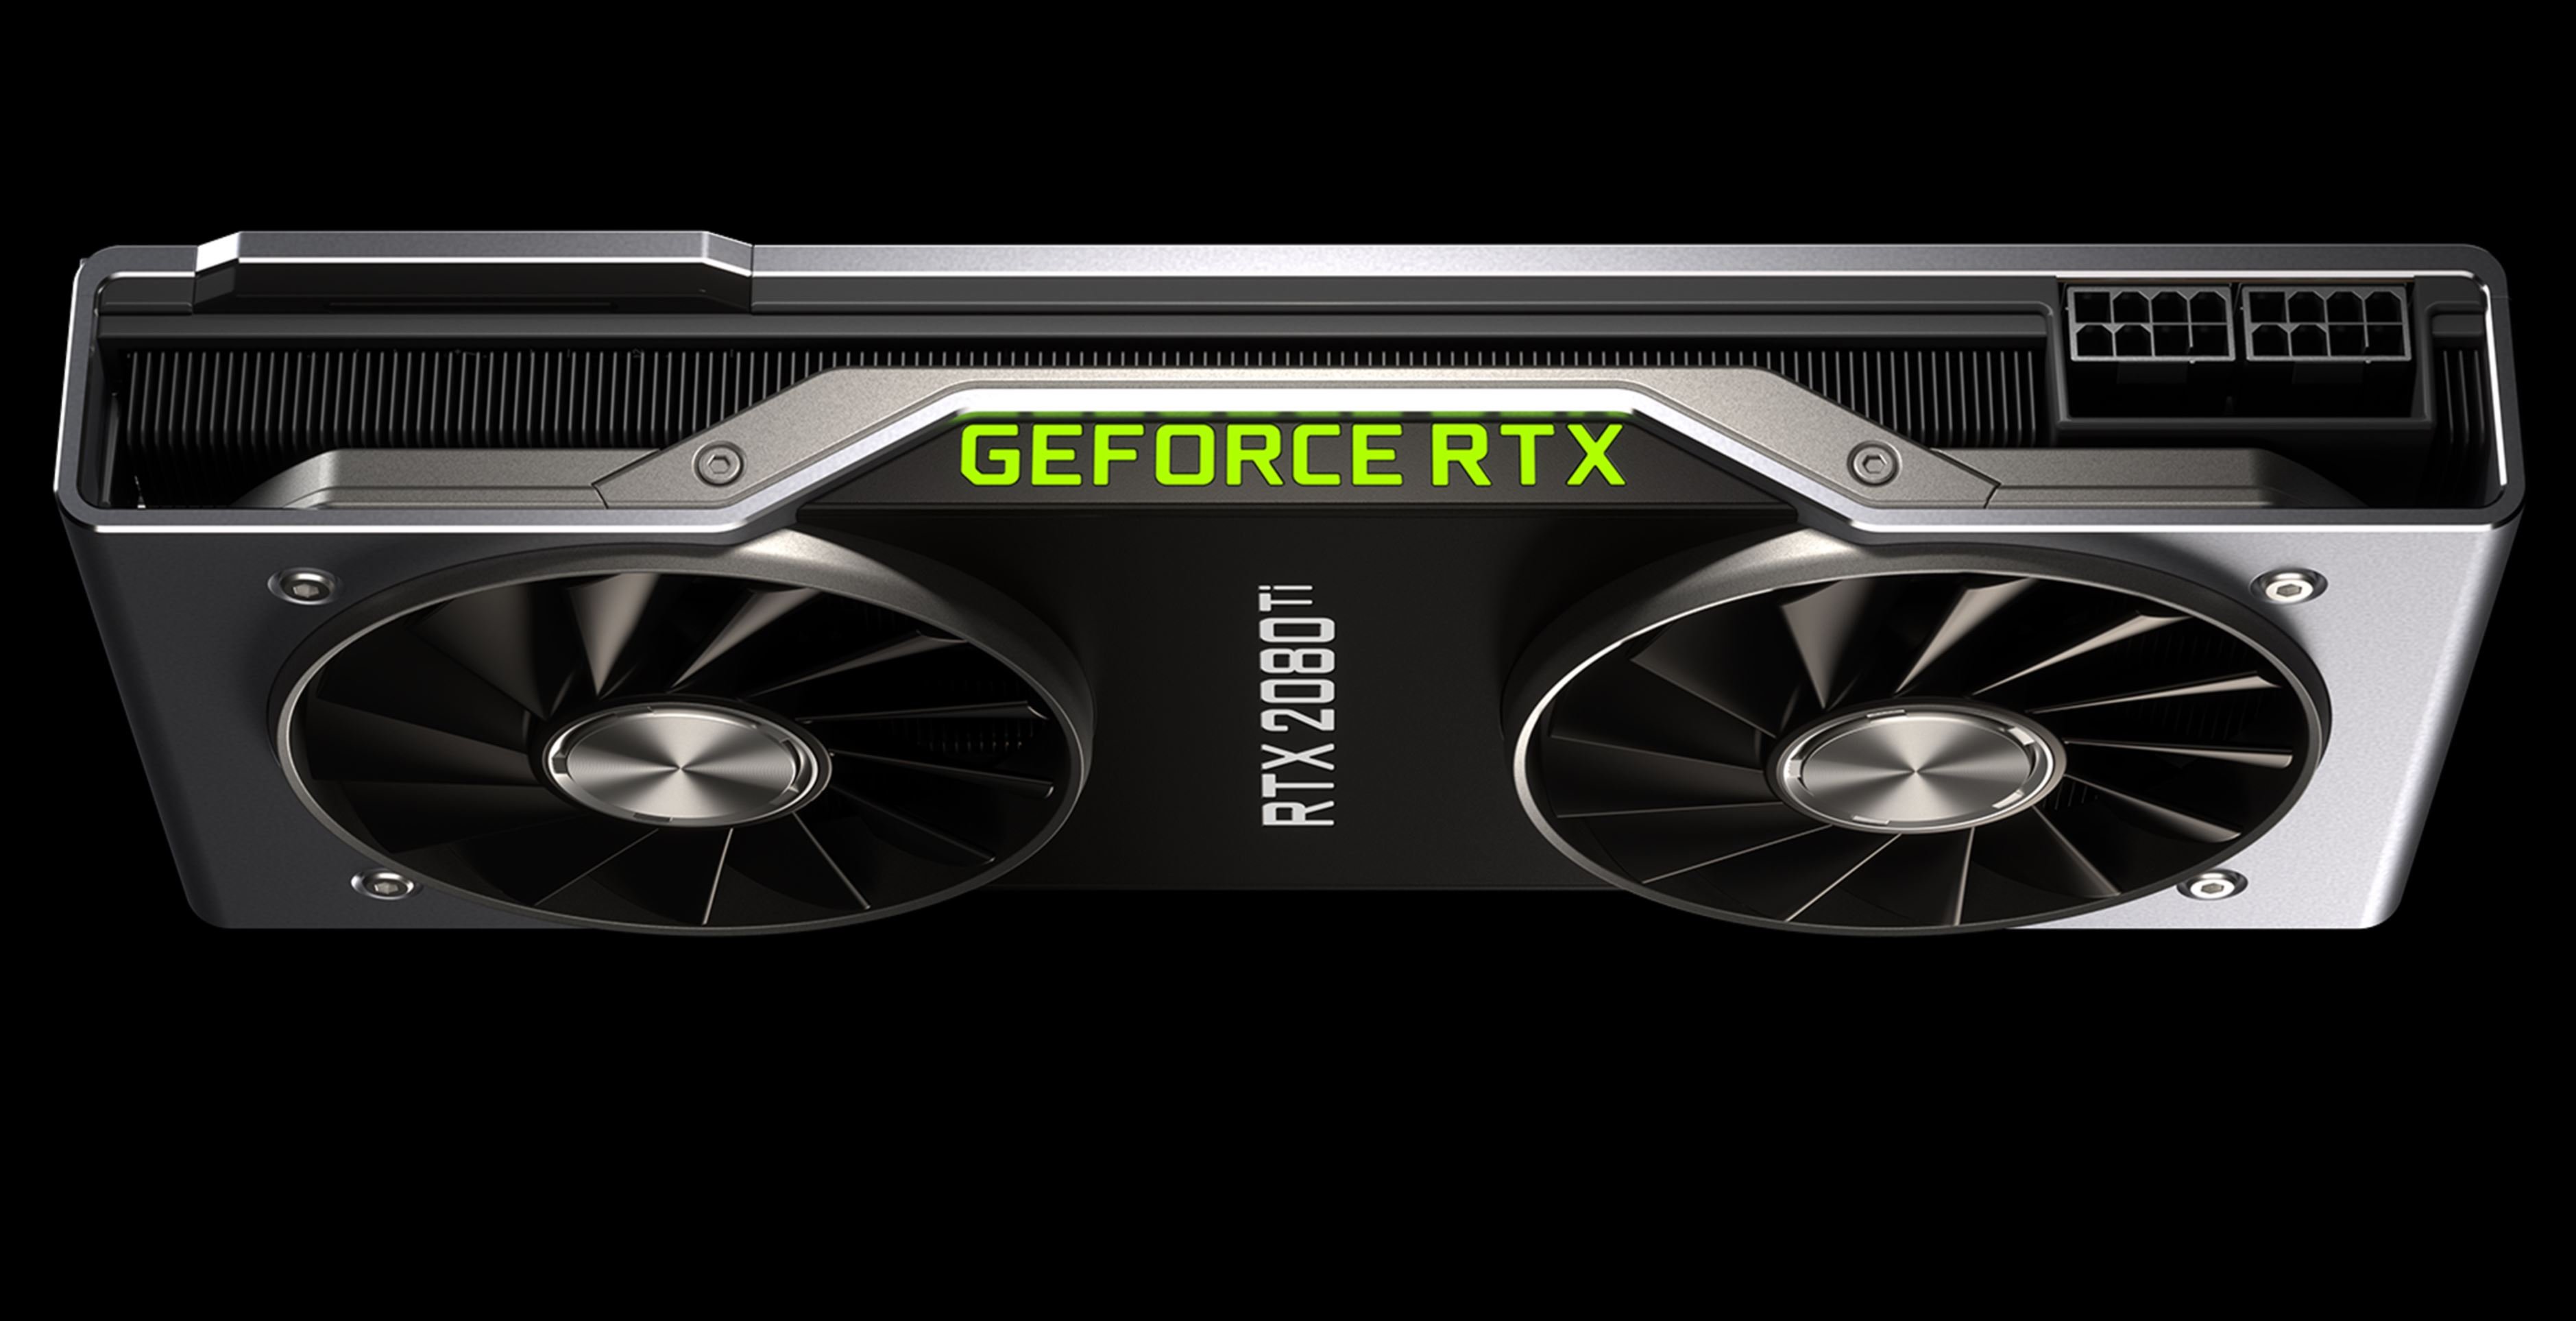 GeForce RTX 2080 Factory Overclocked From Zotac On Sale Now For Only $649